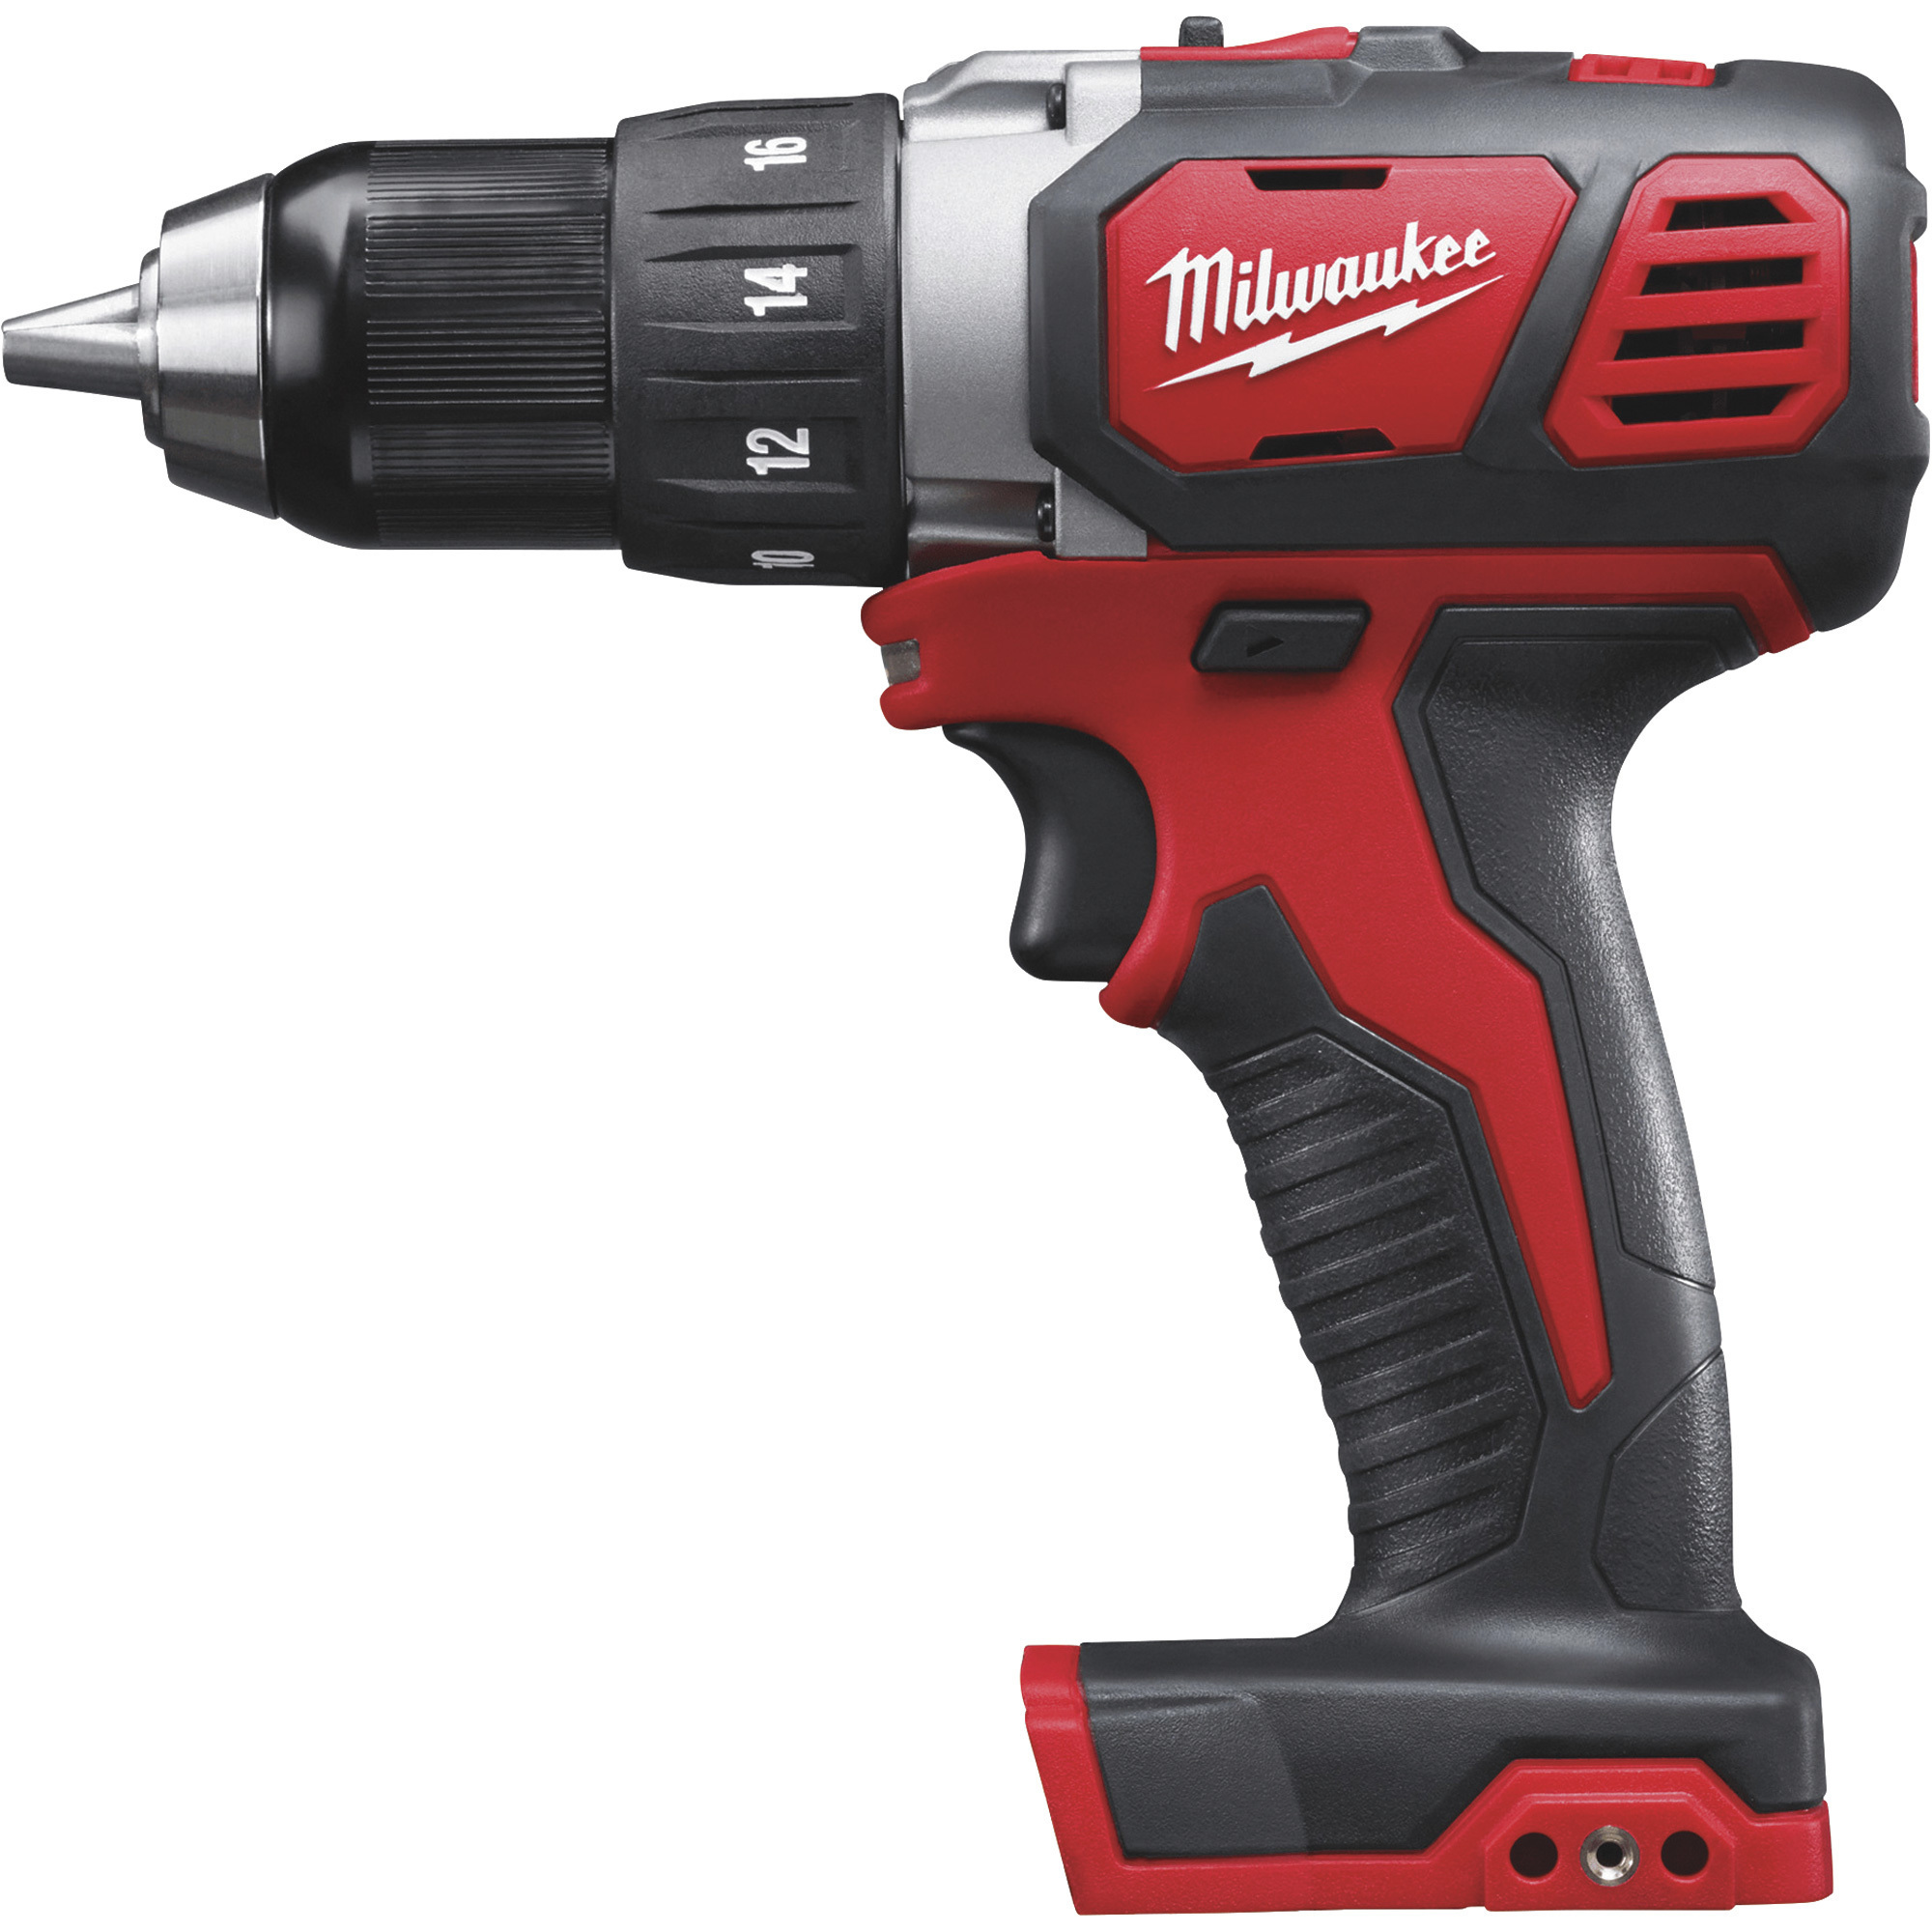 Milwaukee M18 Lithium-Ion Cordless Compact Electric Drill Driver, Tool Only, 1/2Inch Keyless Chuck, 500 Inch/Lbs. Torque, 1800 RPM, Model 2606-20